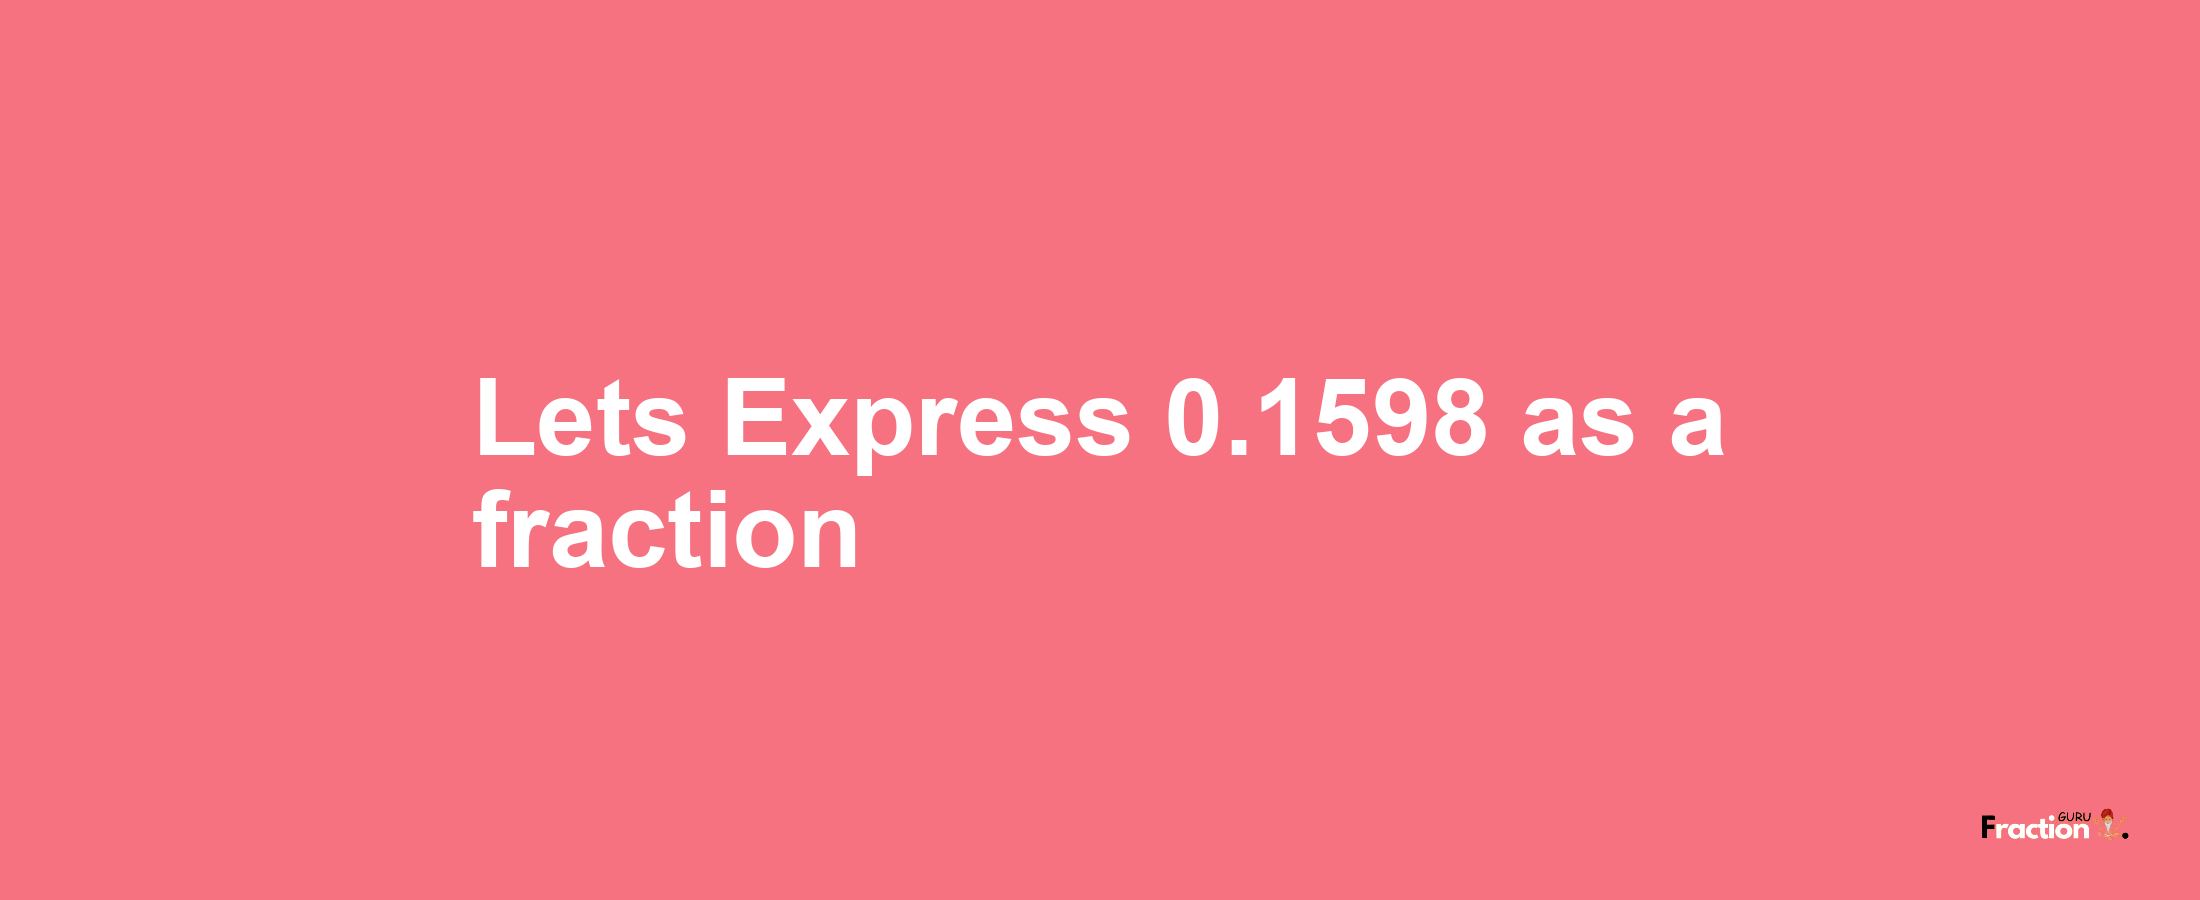 Lets Express 0.1598 as afraction